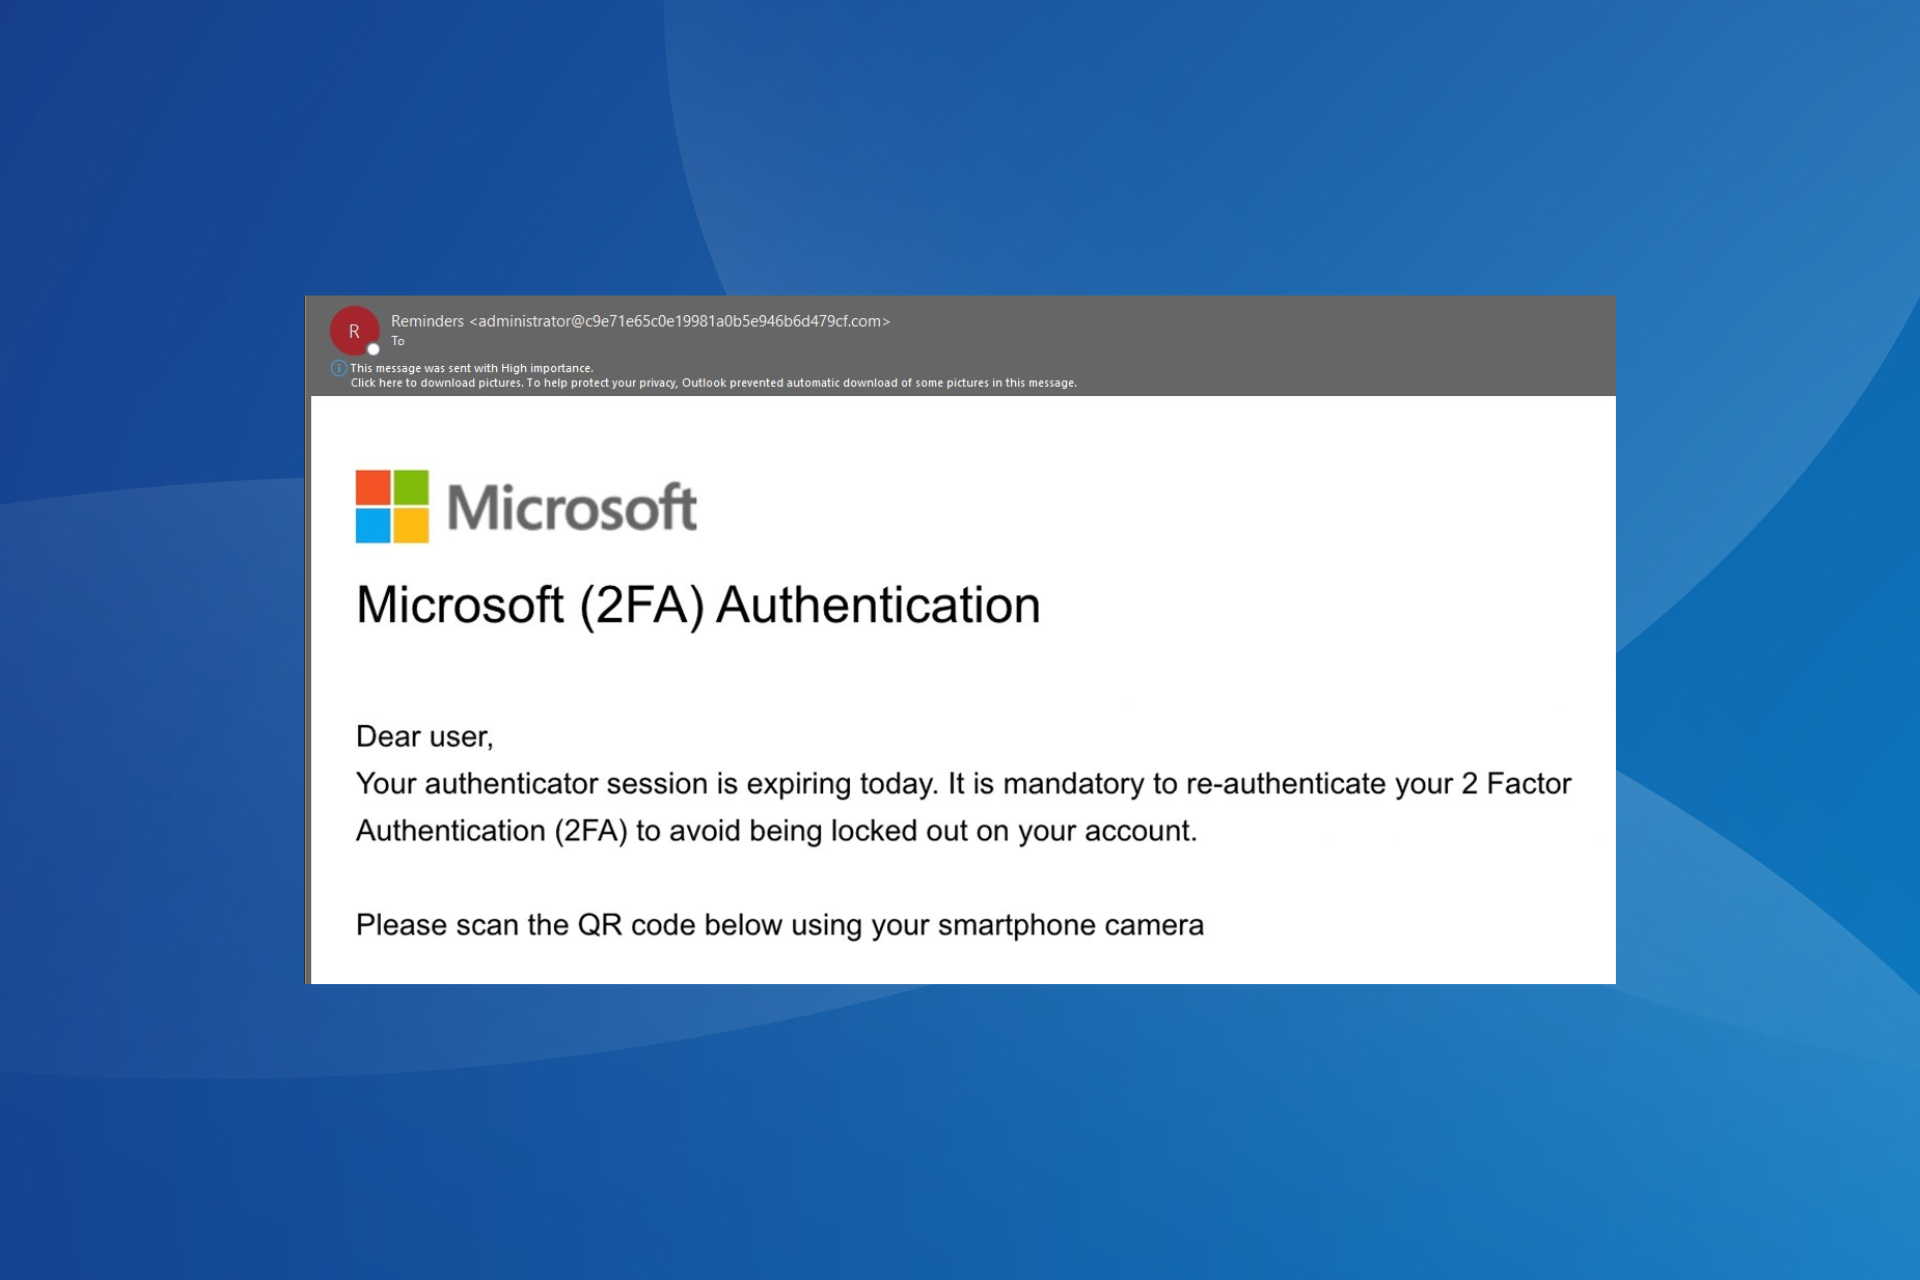 Have you received a two-step verification setup email lately? It’s not from Microsoft